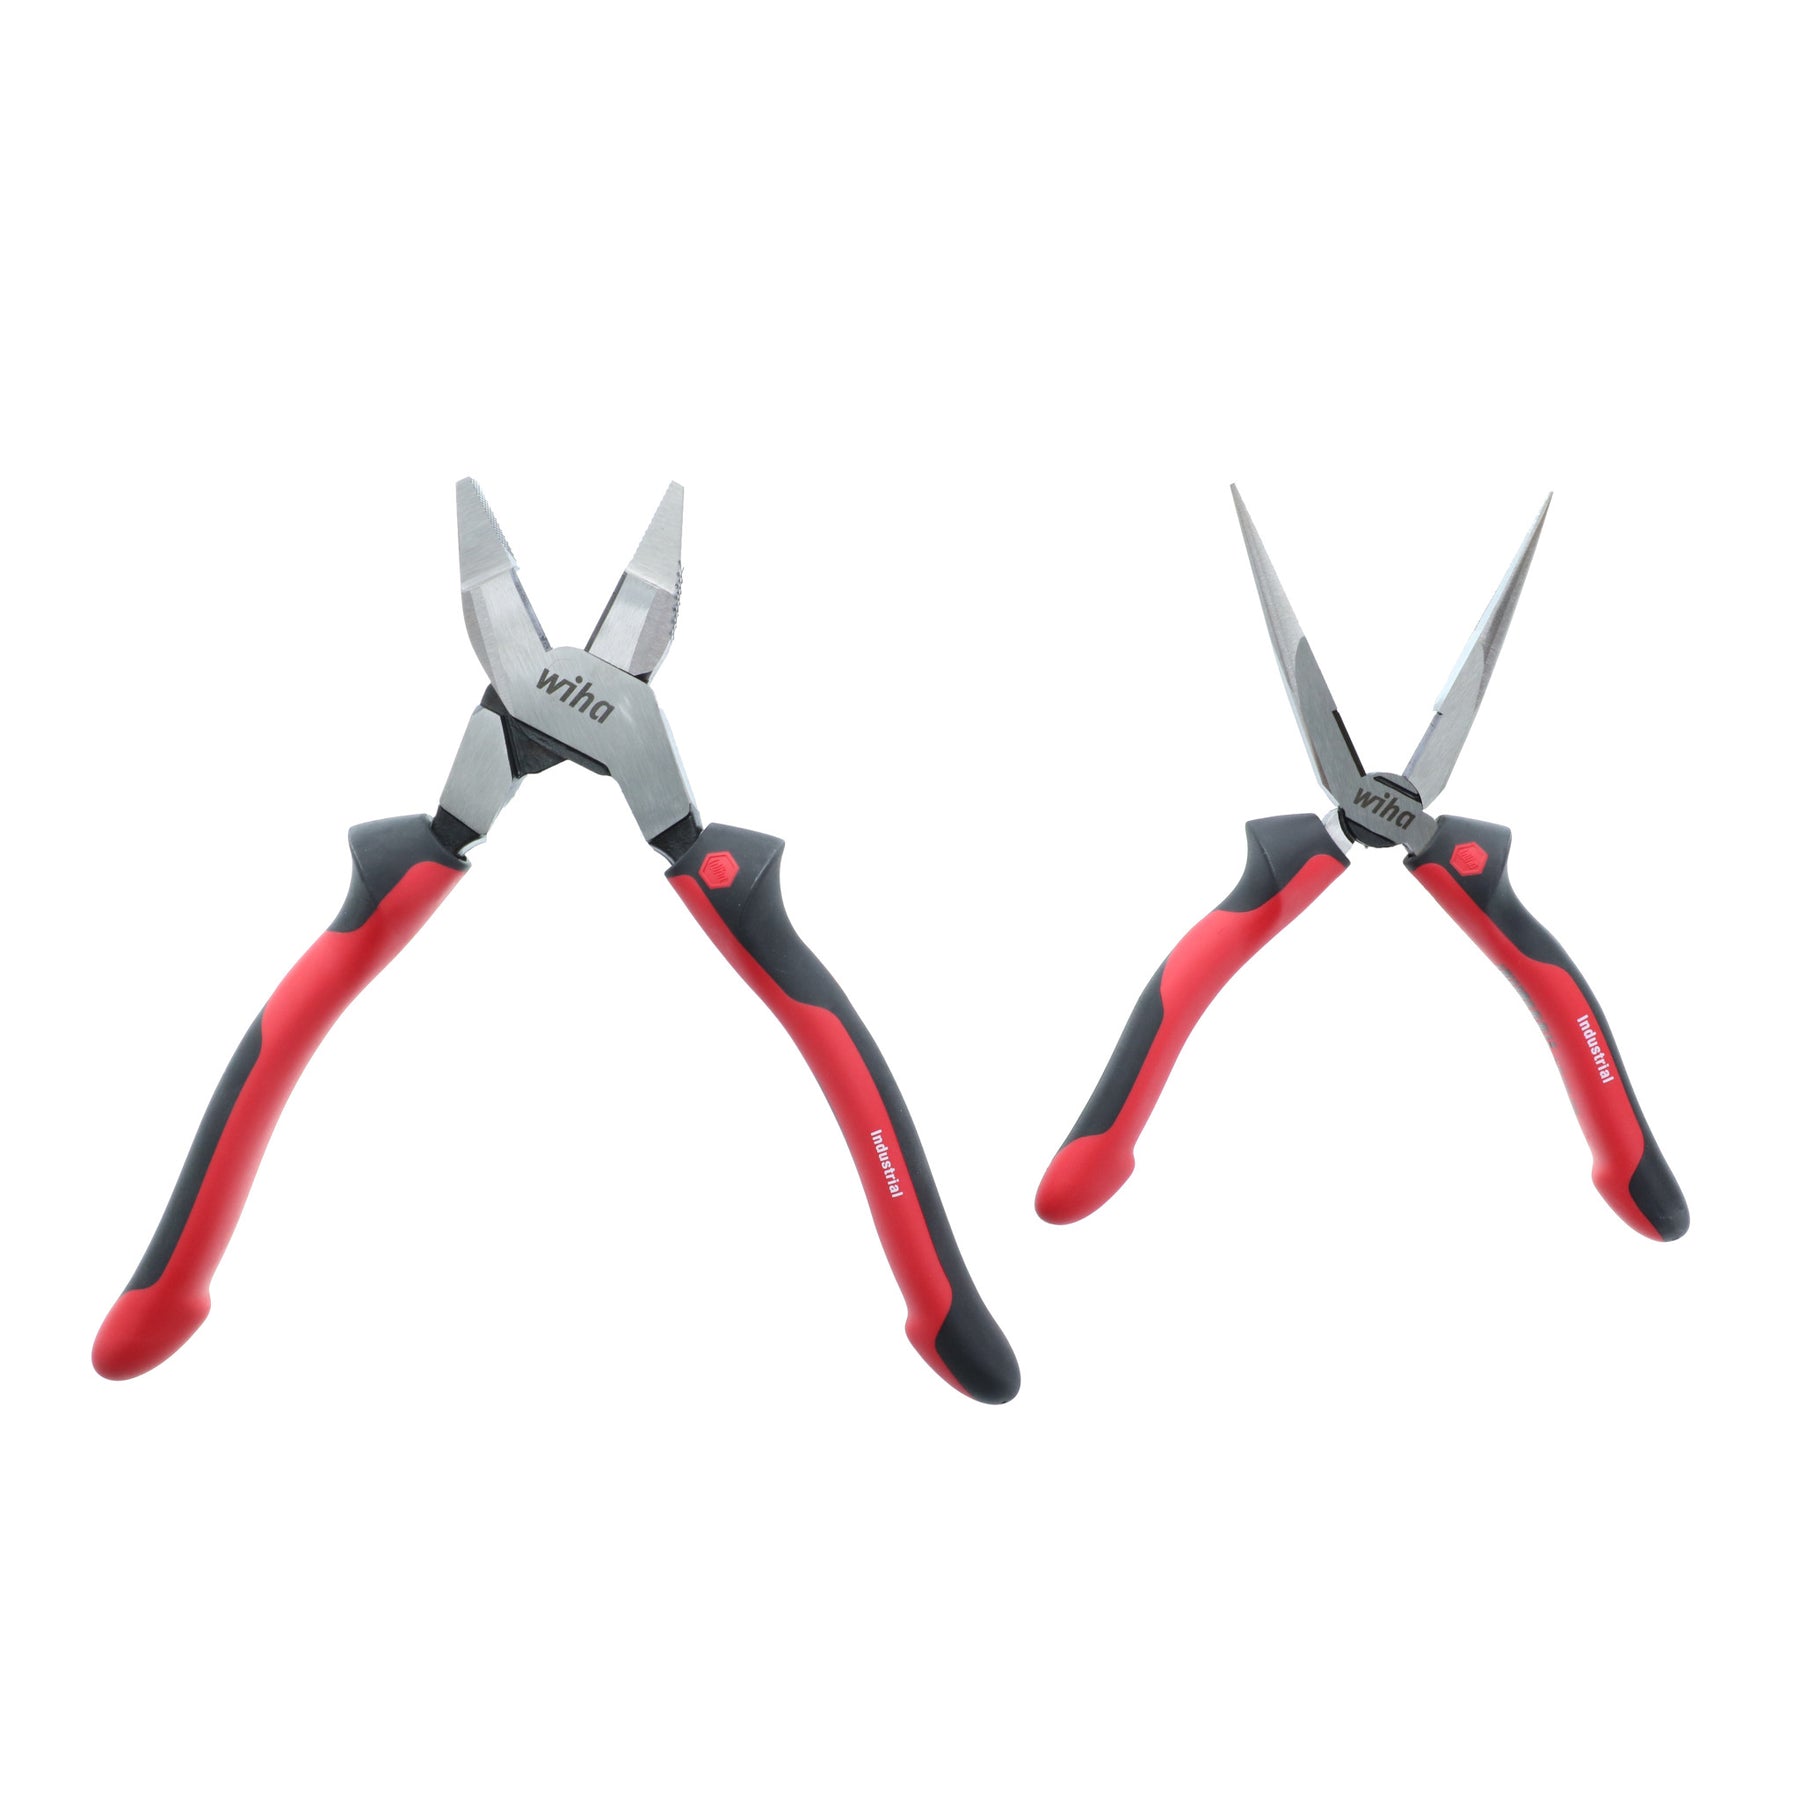 2 Piece Industrial SoftGrip NE Style Lineman's and Long Nose Pliers Set